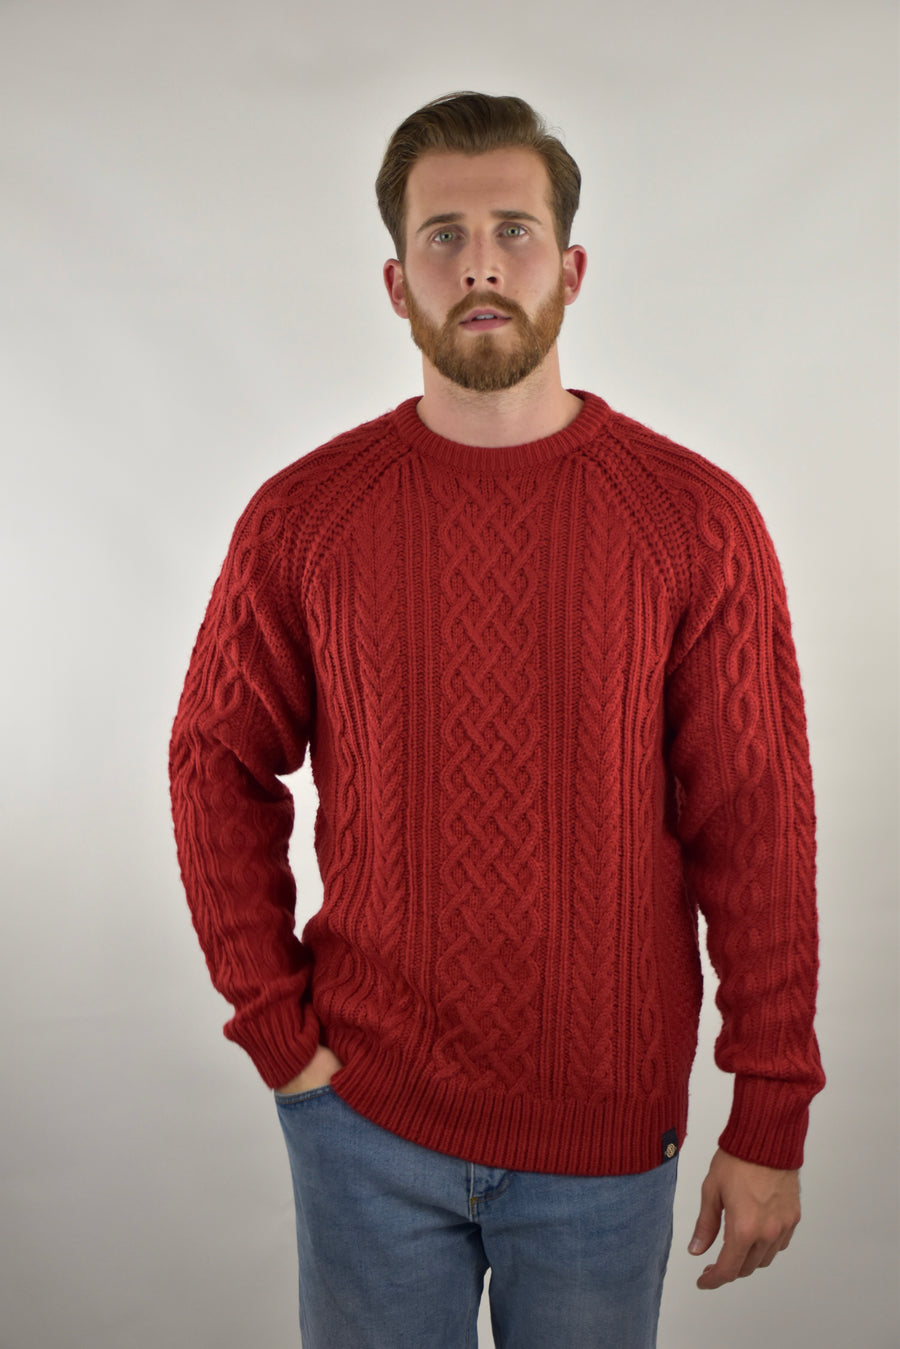 Humble Pioneer - Men's Red Fisherman Cable Knit Jumper